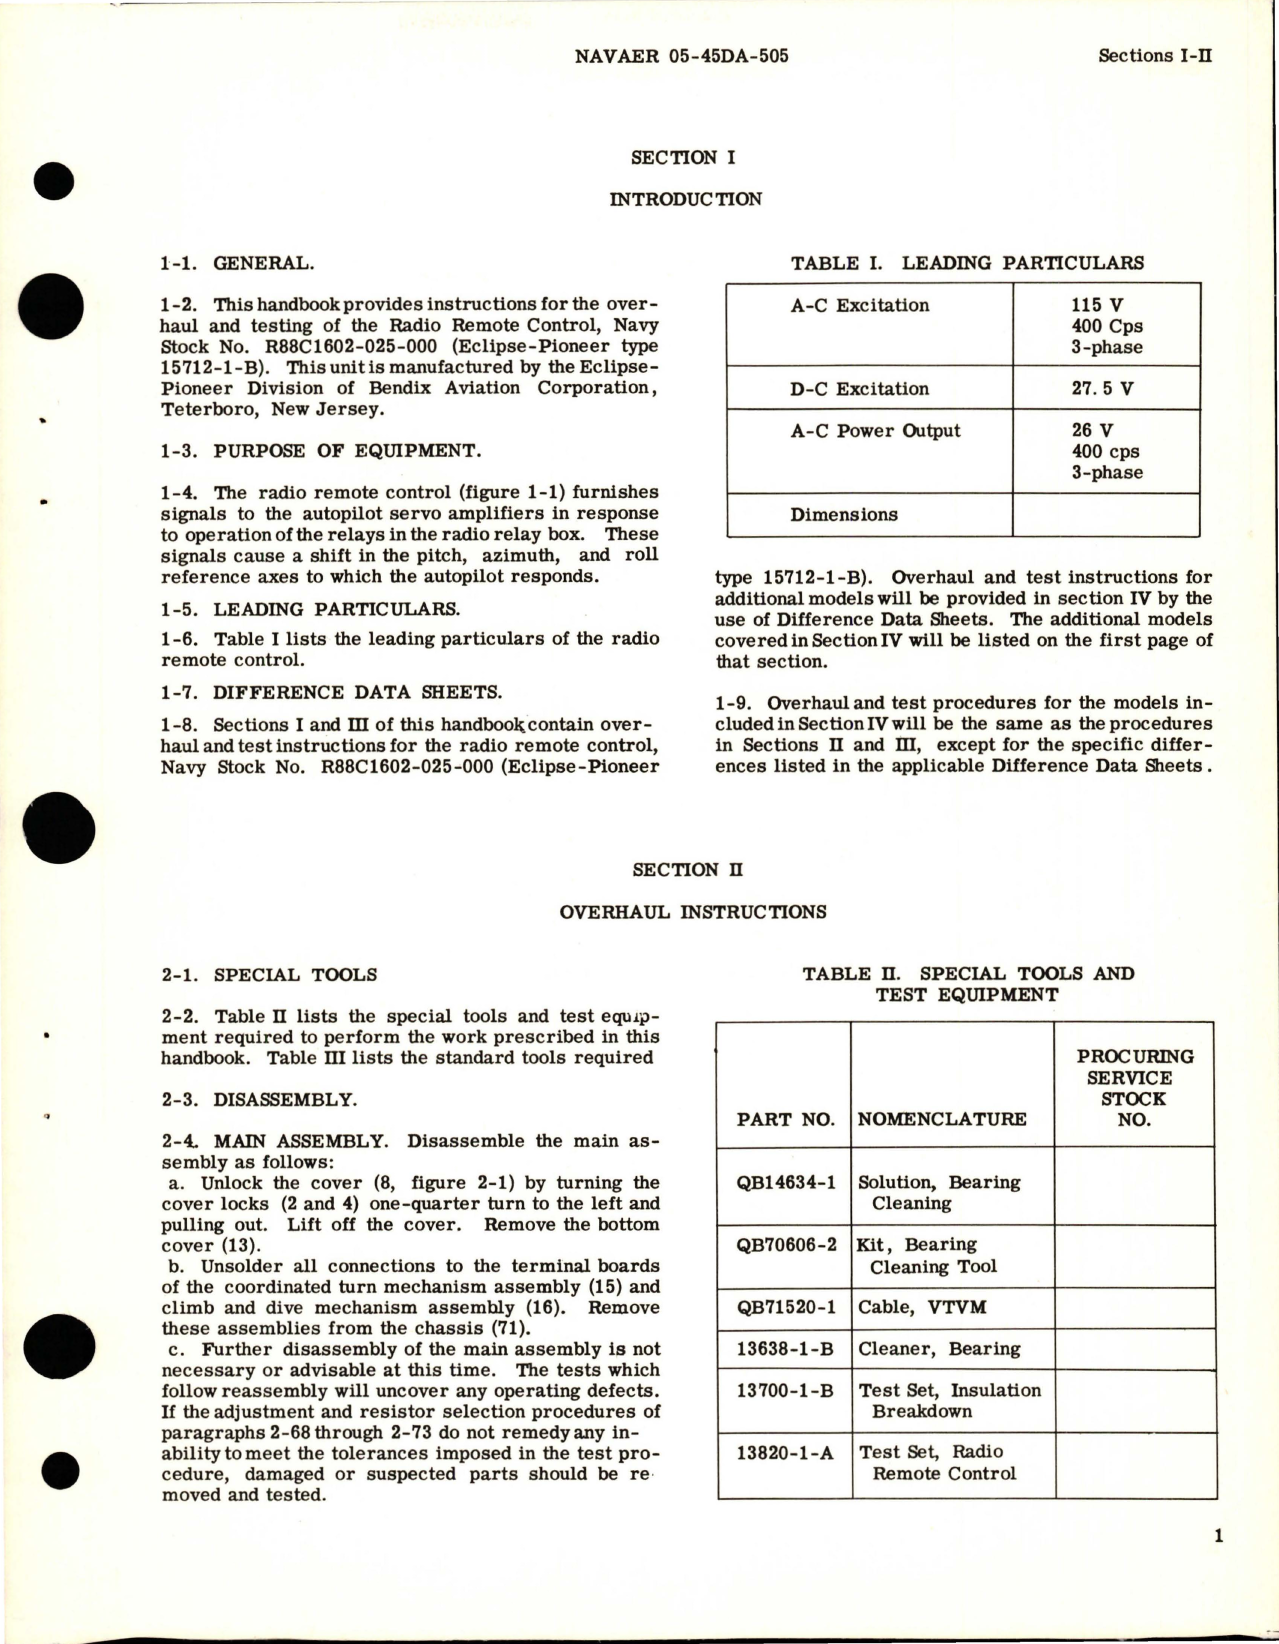 Sample page 5 from AirCorps Library document: Overhaul Instructions for Radio Remote Control - Part 15712-1-B 